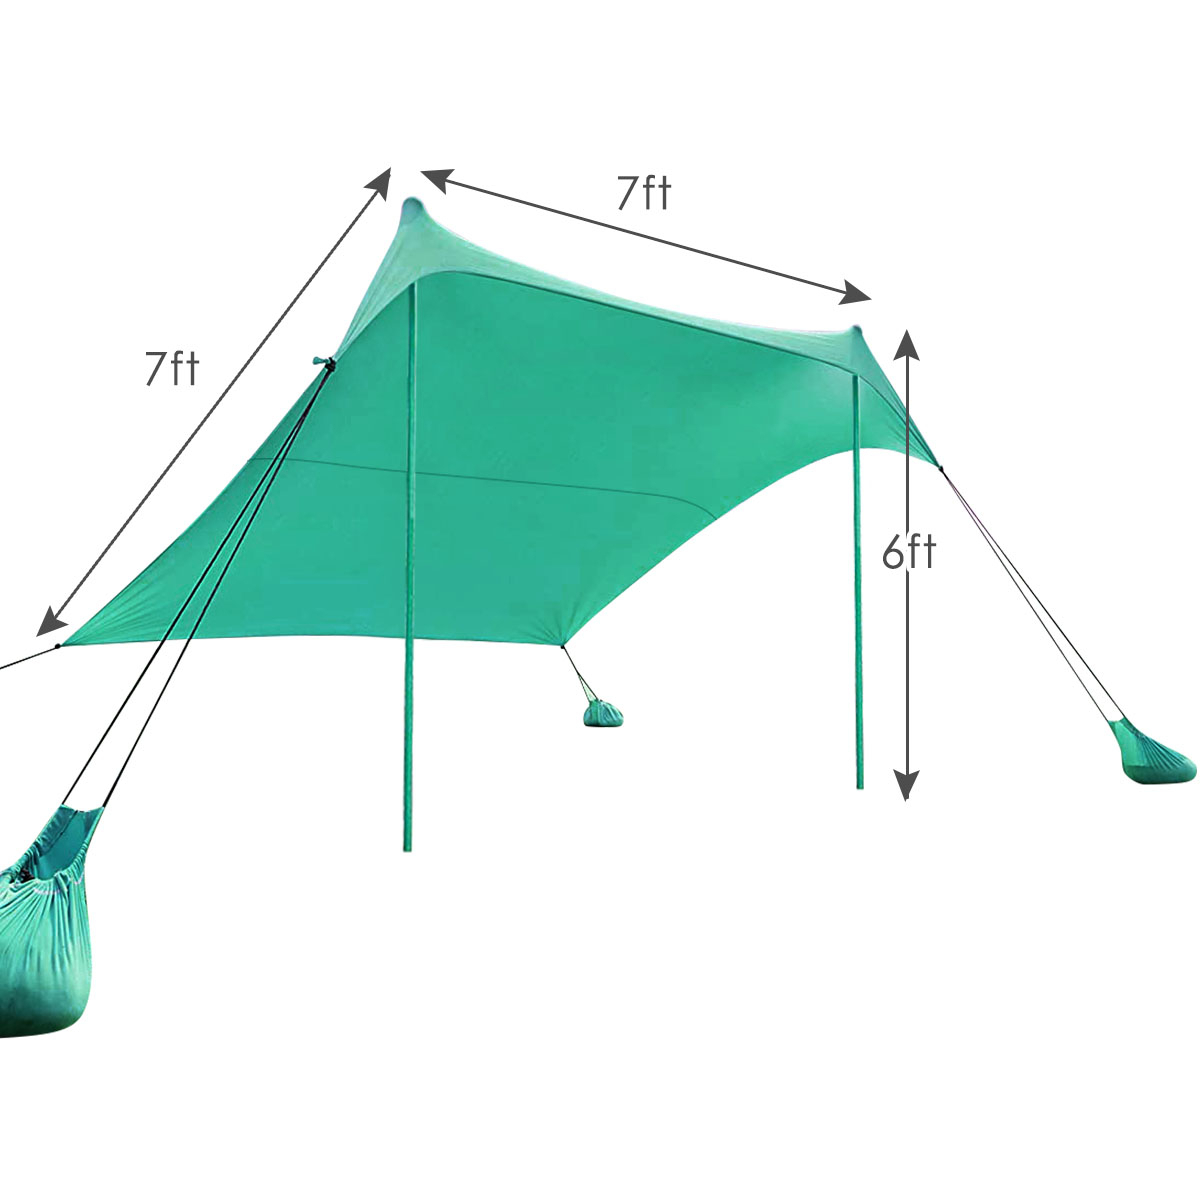 Gymax 7x7 FT Portable Beach Canopy Tent Shelter W/ Sand Anchor Carry Bag - Blue